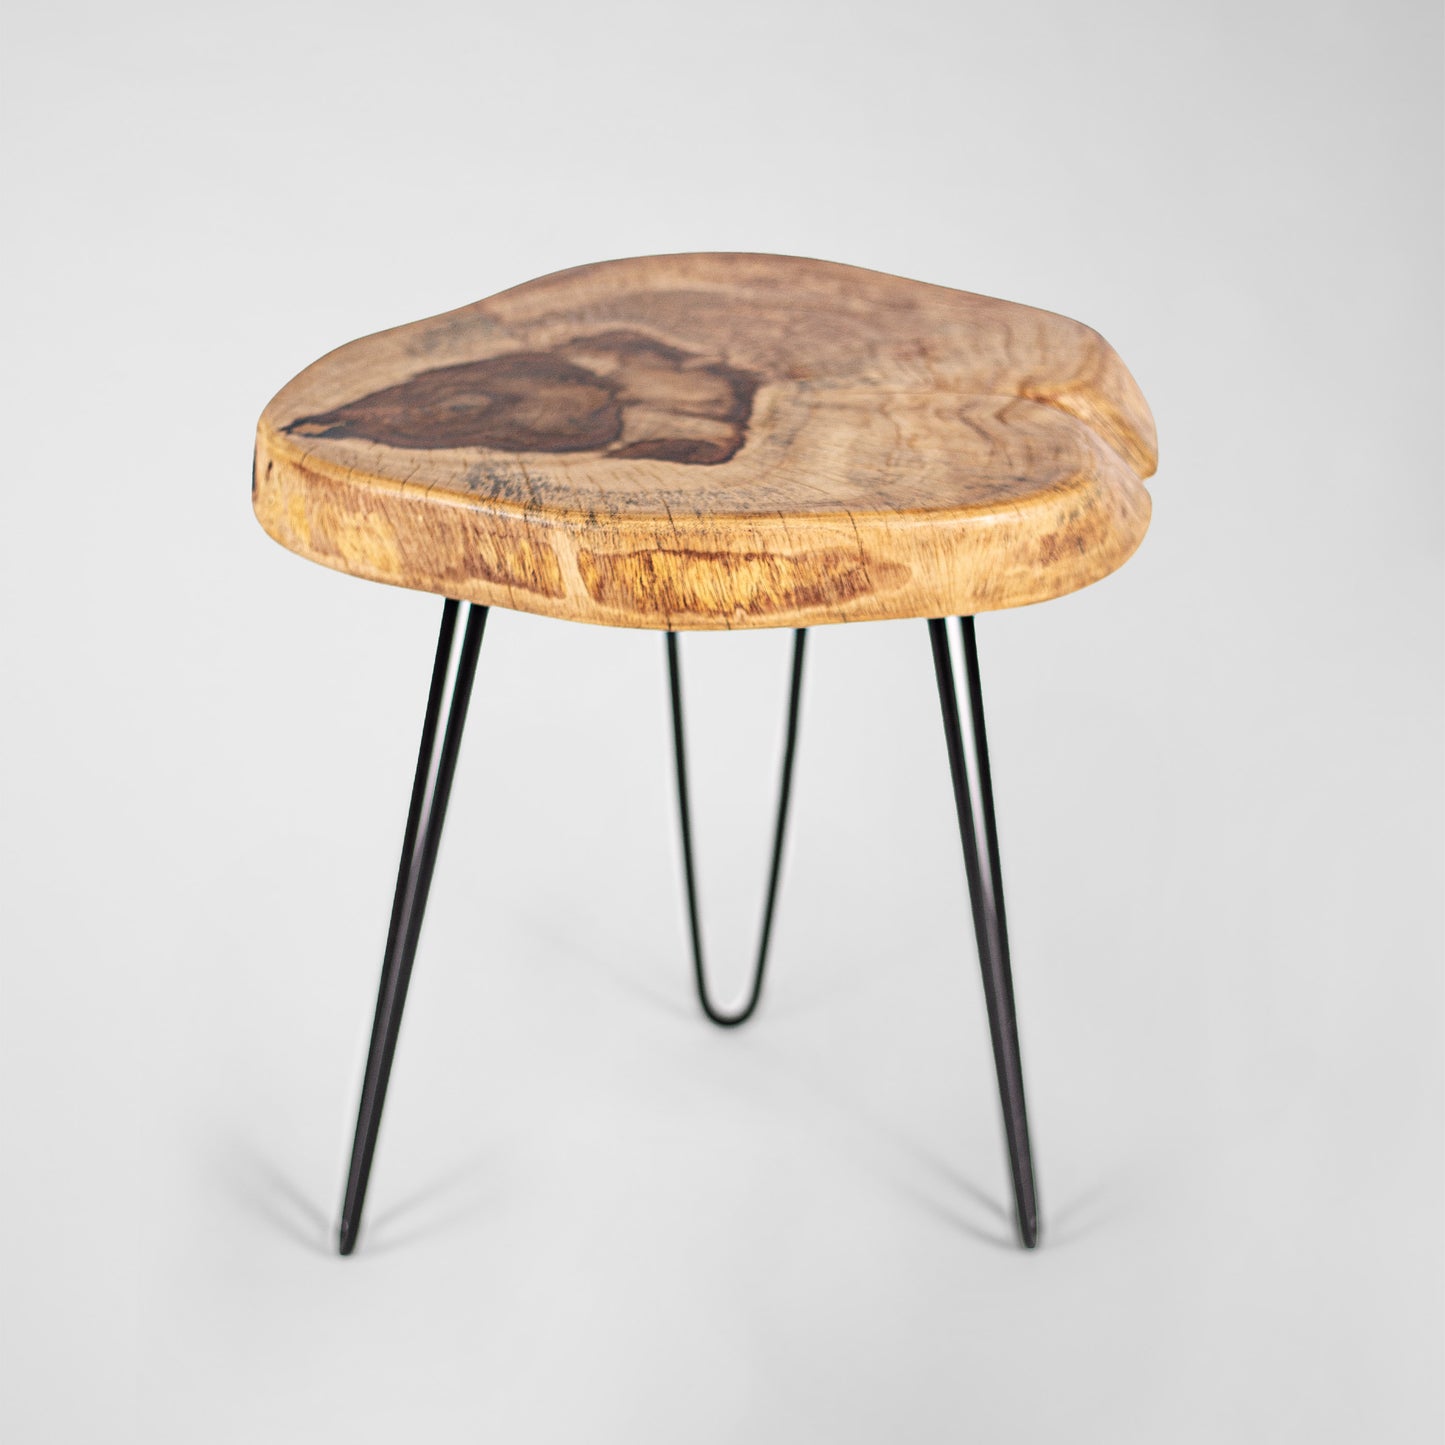 Johnny Slice – rustic industrial design HairPin stool made of wood and metal